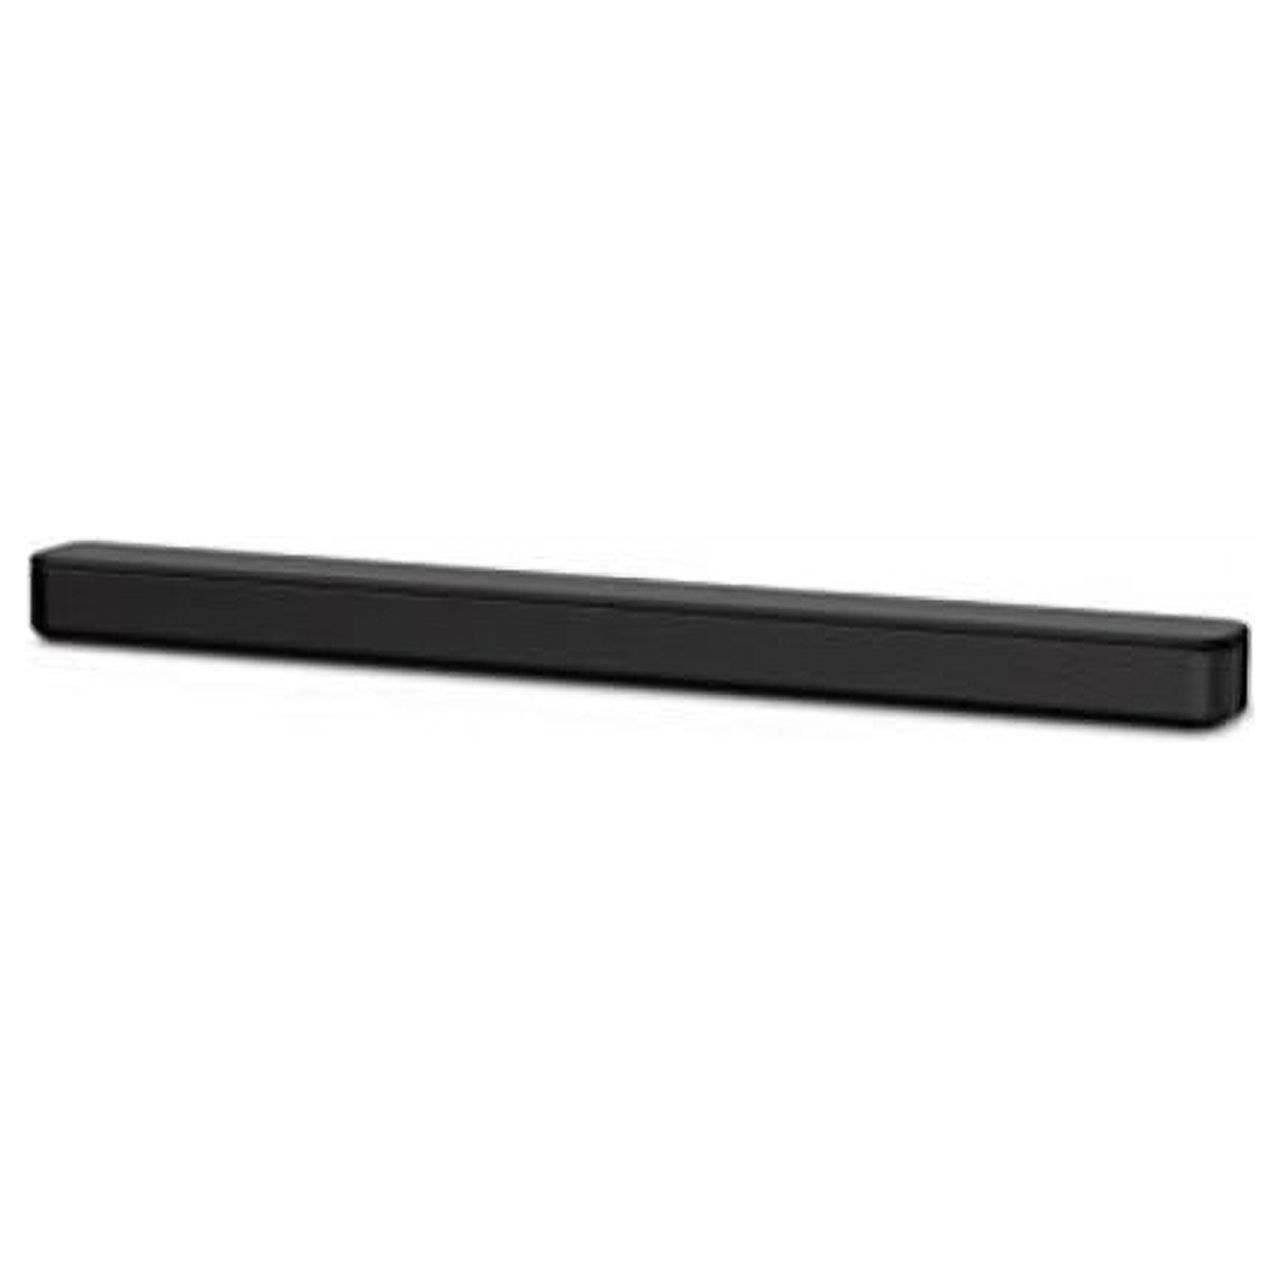 Restored Sony HT-S100F 2.0 Soundbar with Bluetooth and Surround (Refurbished) - image 1 of 1